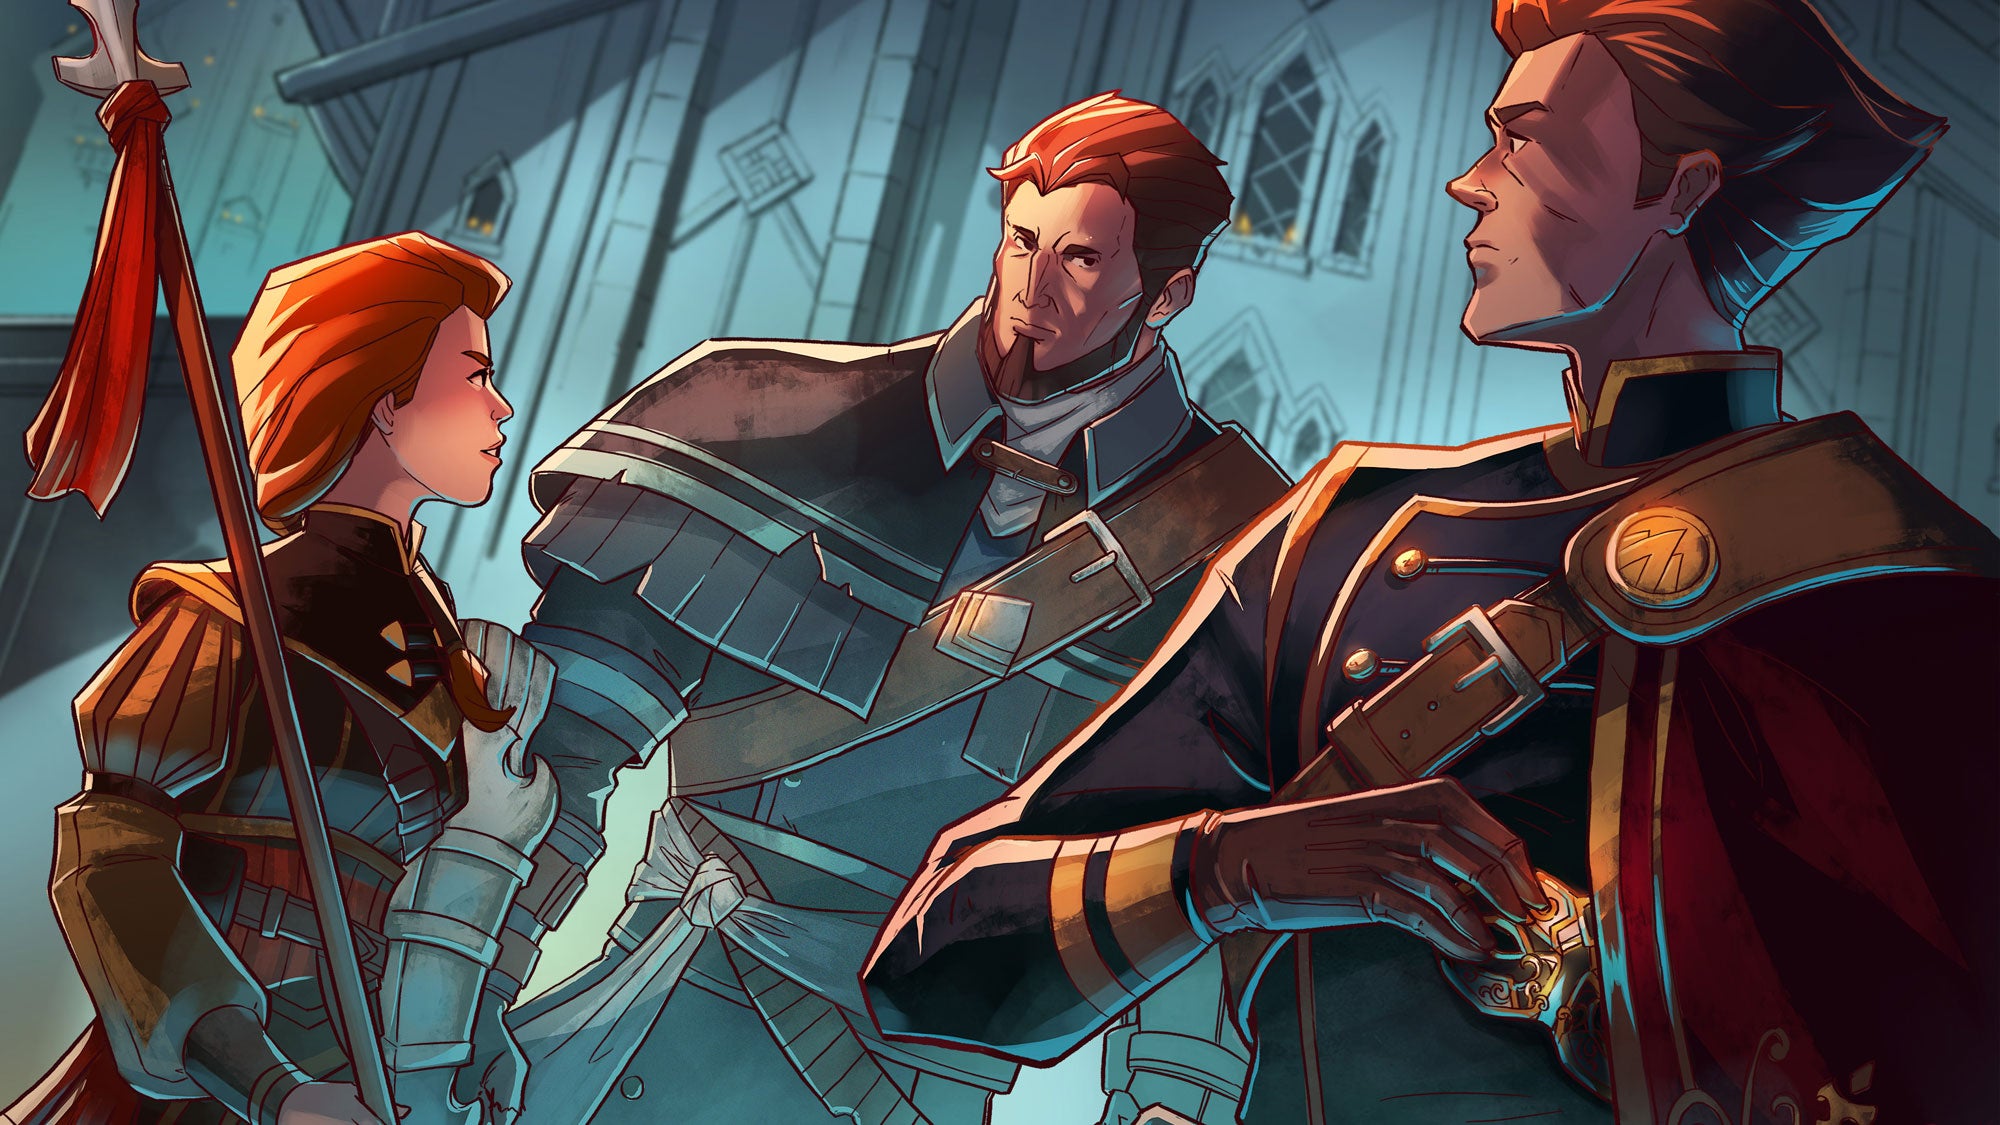 Image for RPG Masquerada is light, fresh and, thankfully, entirely orc-free